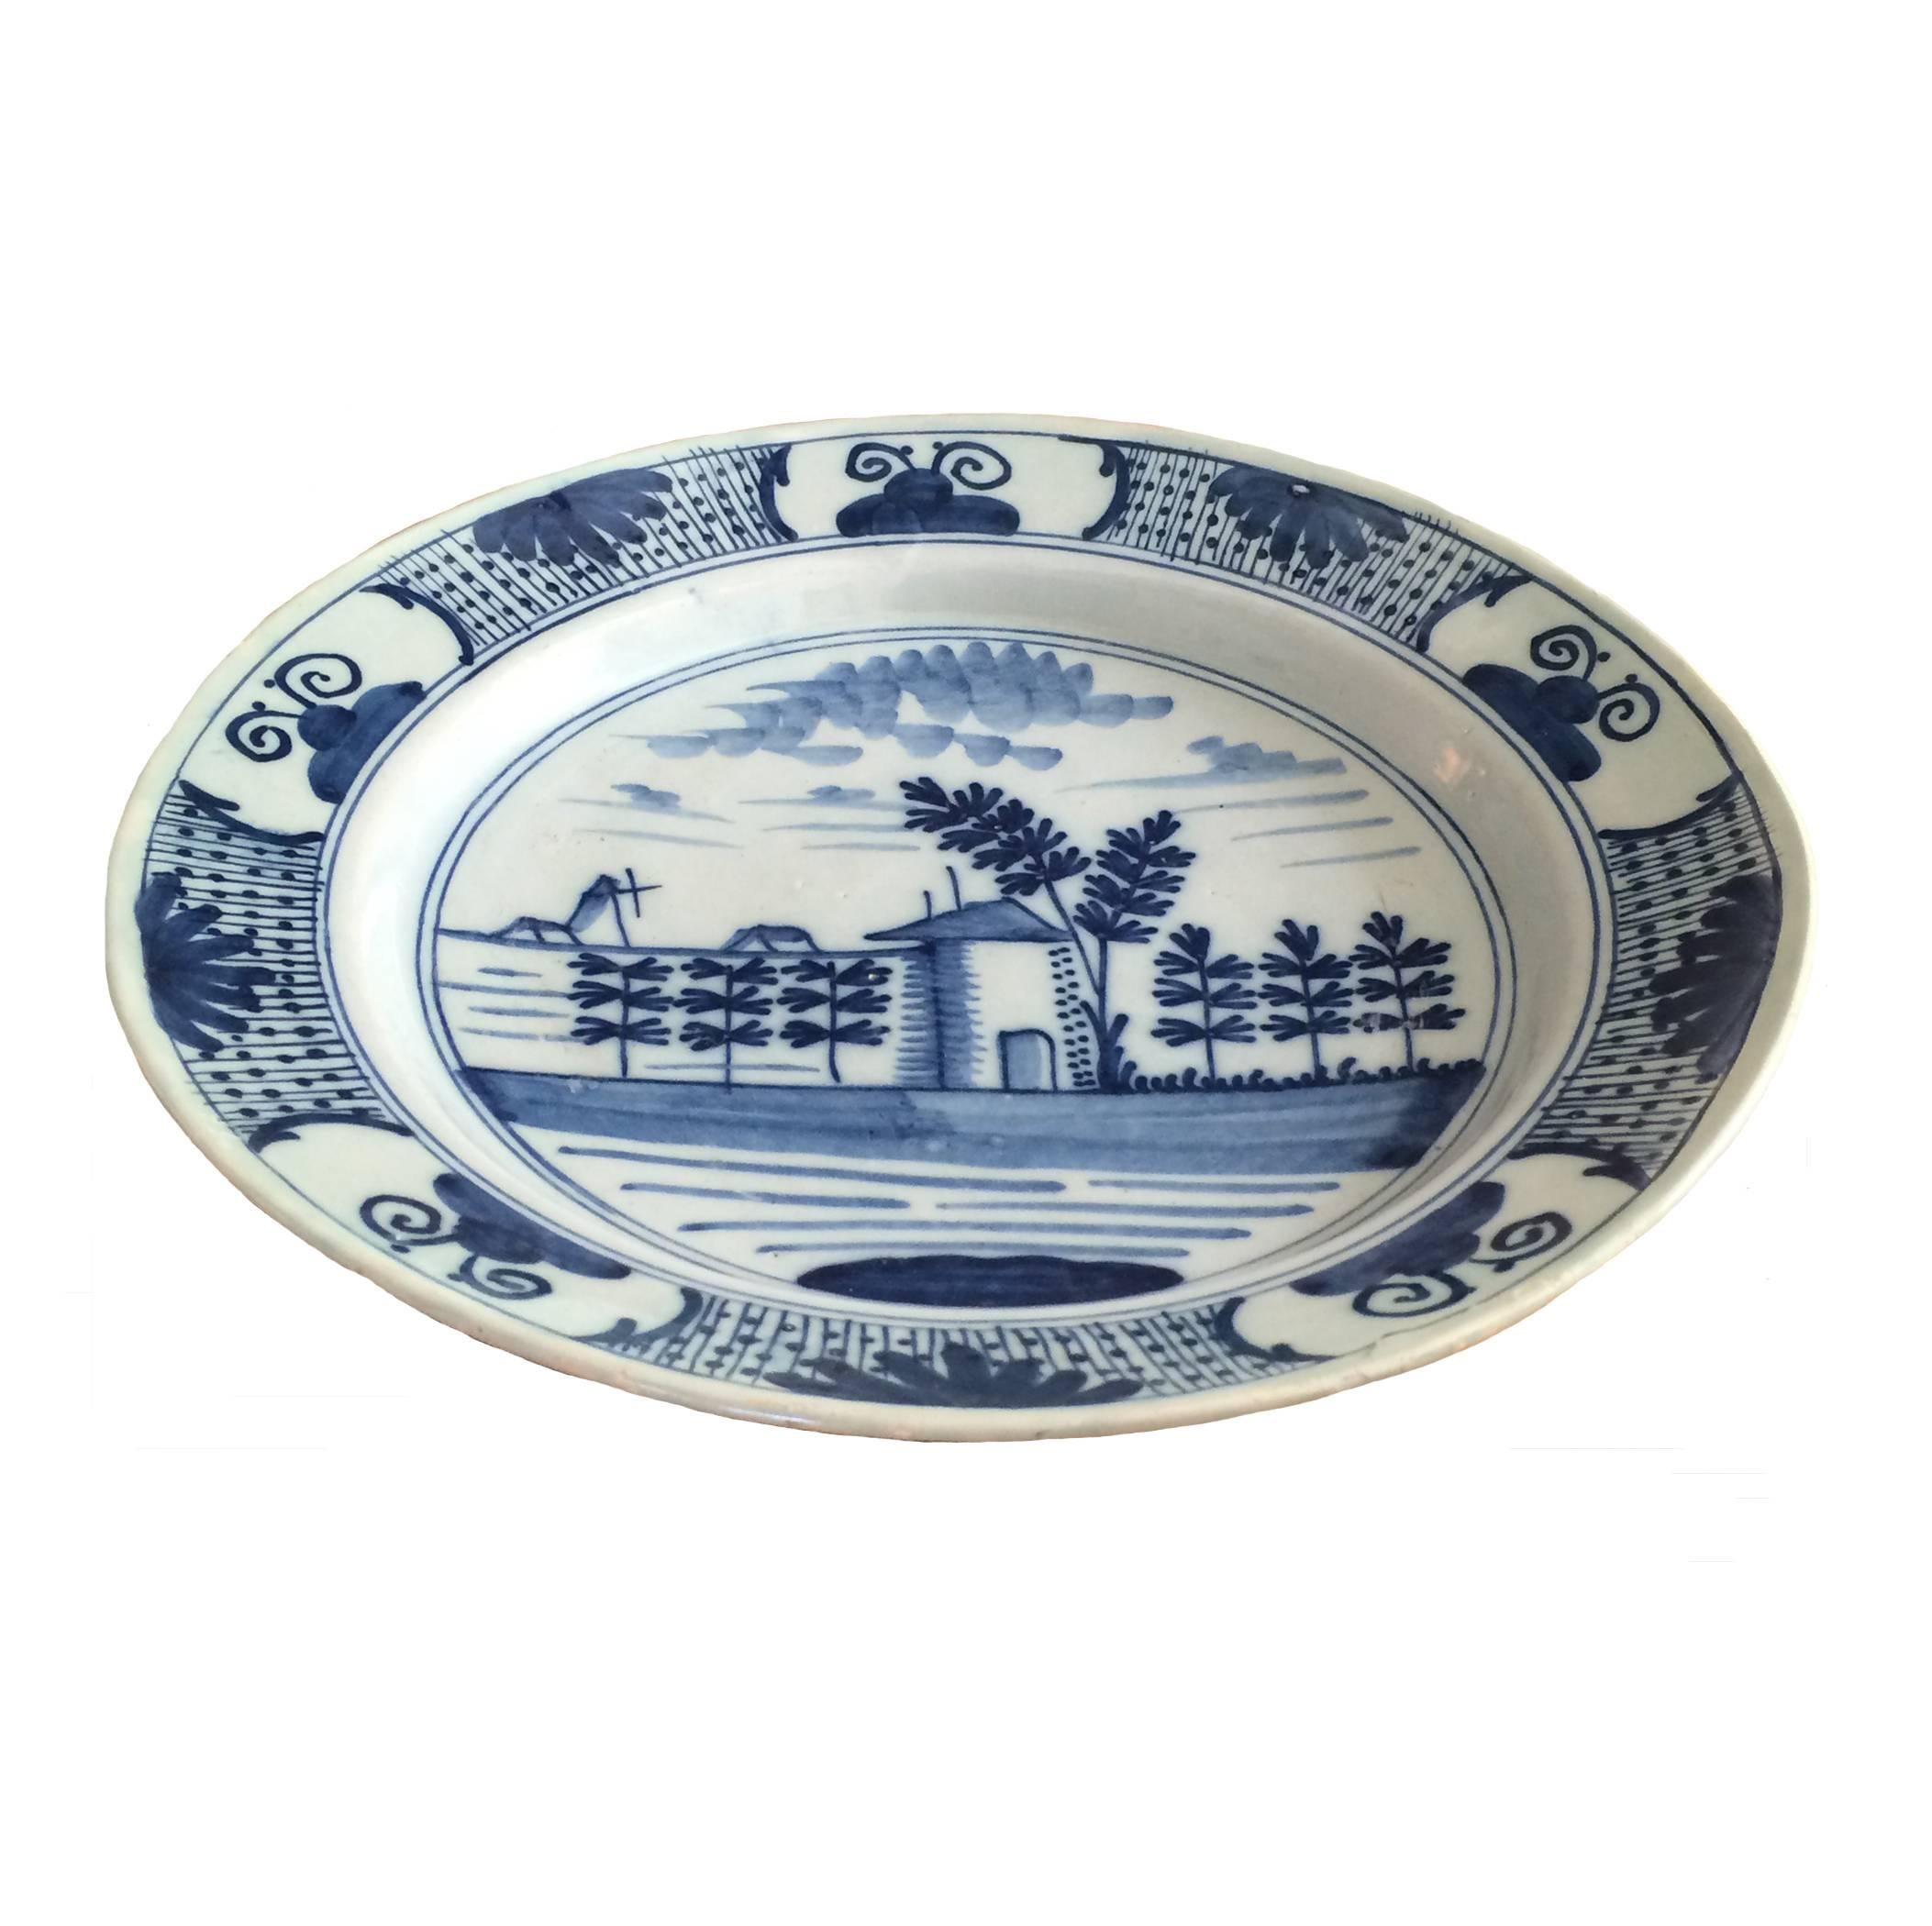 Large blue and white delft plate depicting a serene setting, a home surrounded by trees and water, 18th century.

